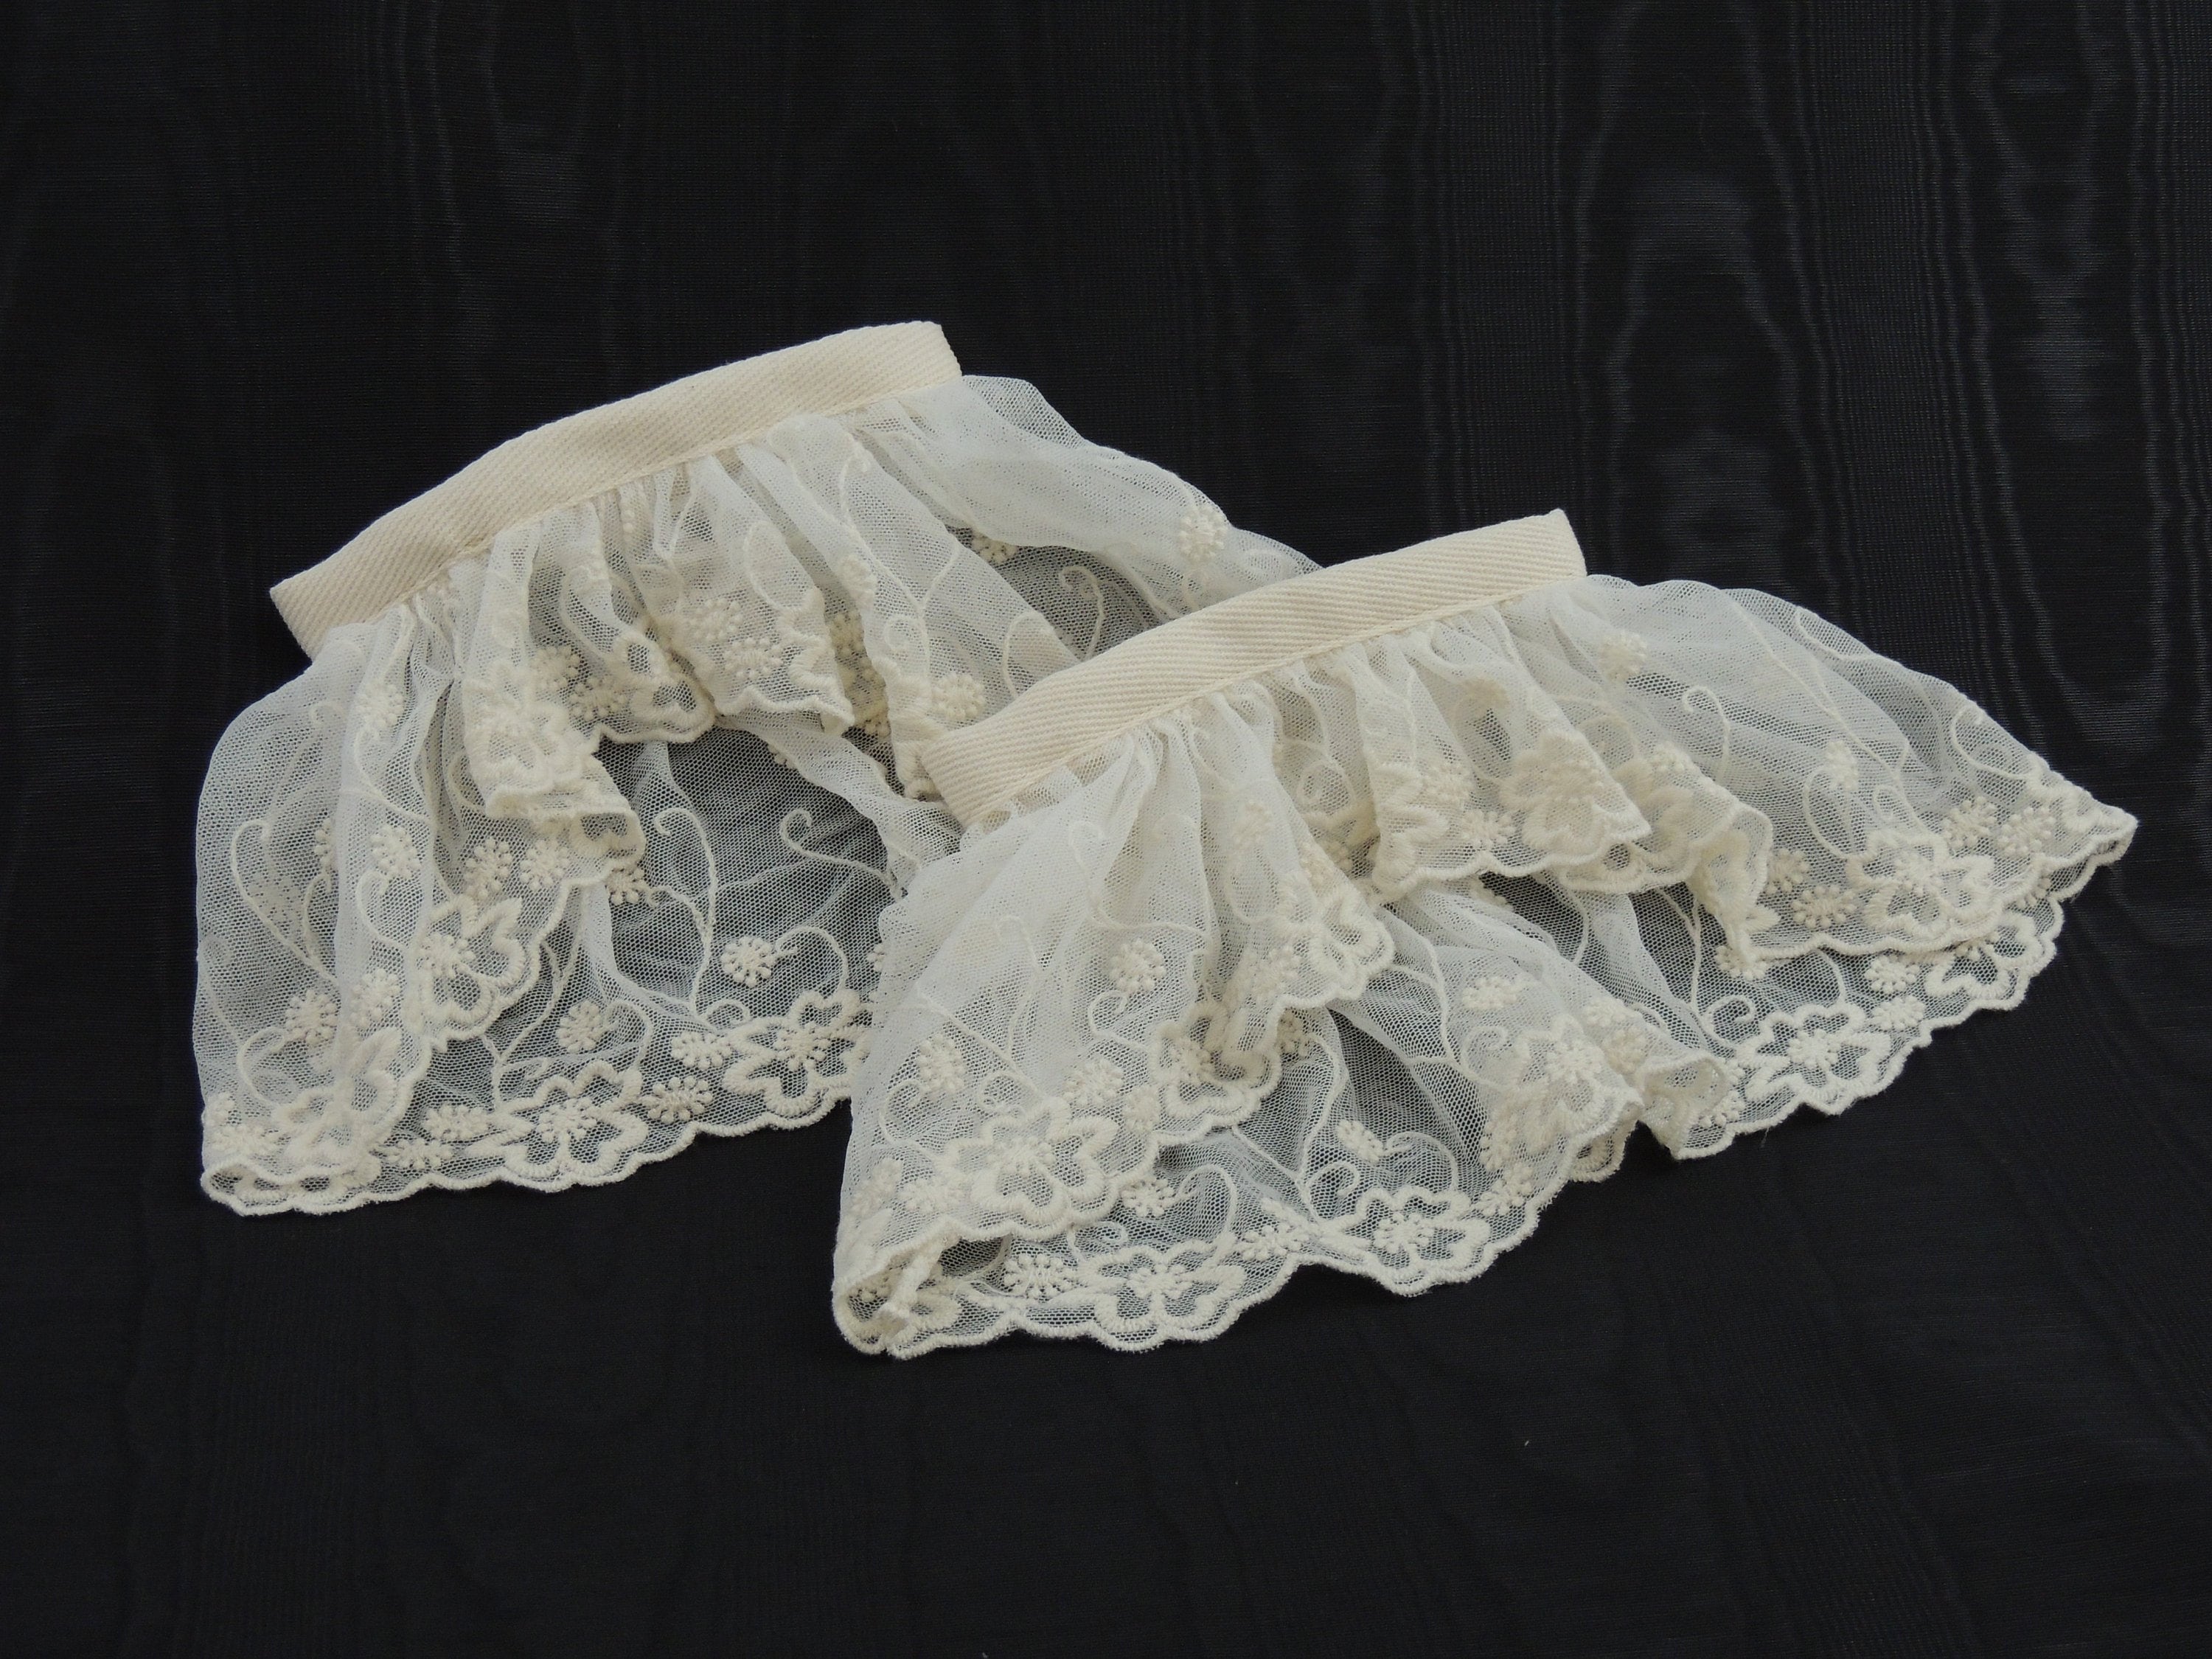 Sleeve Ruffles-engagements-colonial-1700's-georgian-embroidered Cotton Net  Lace or Cotton Edged historically Accurate Repro-living History 